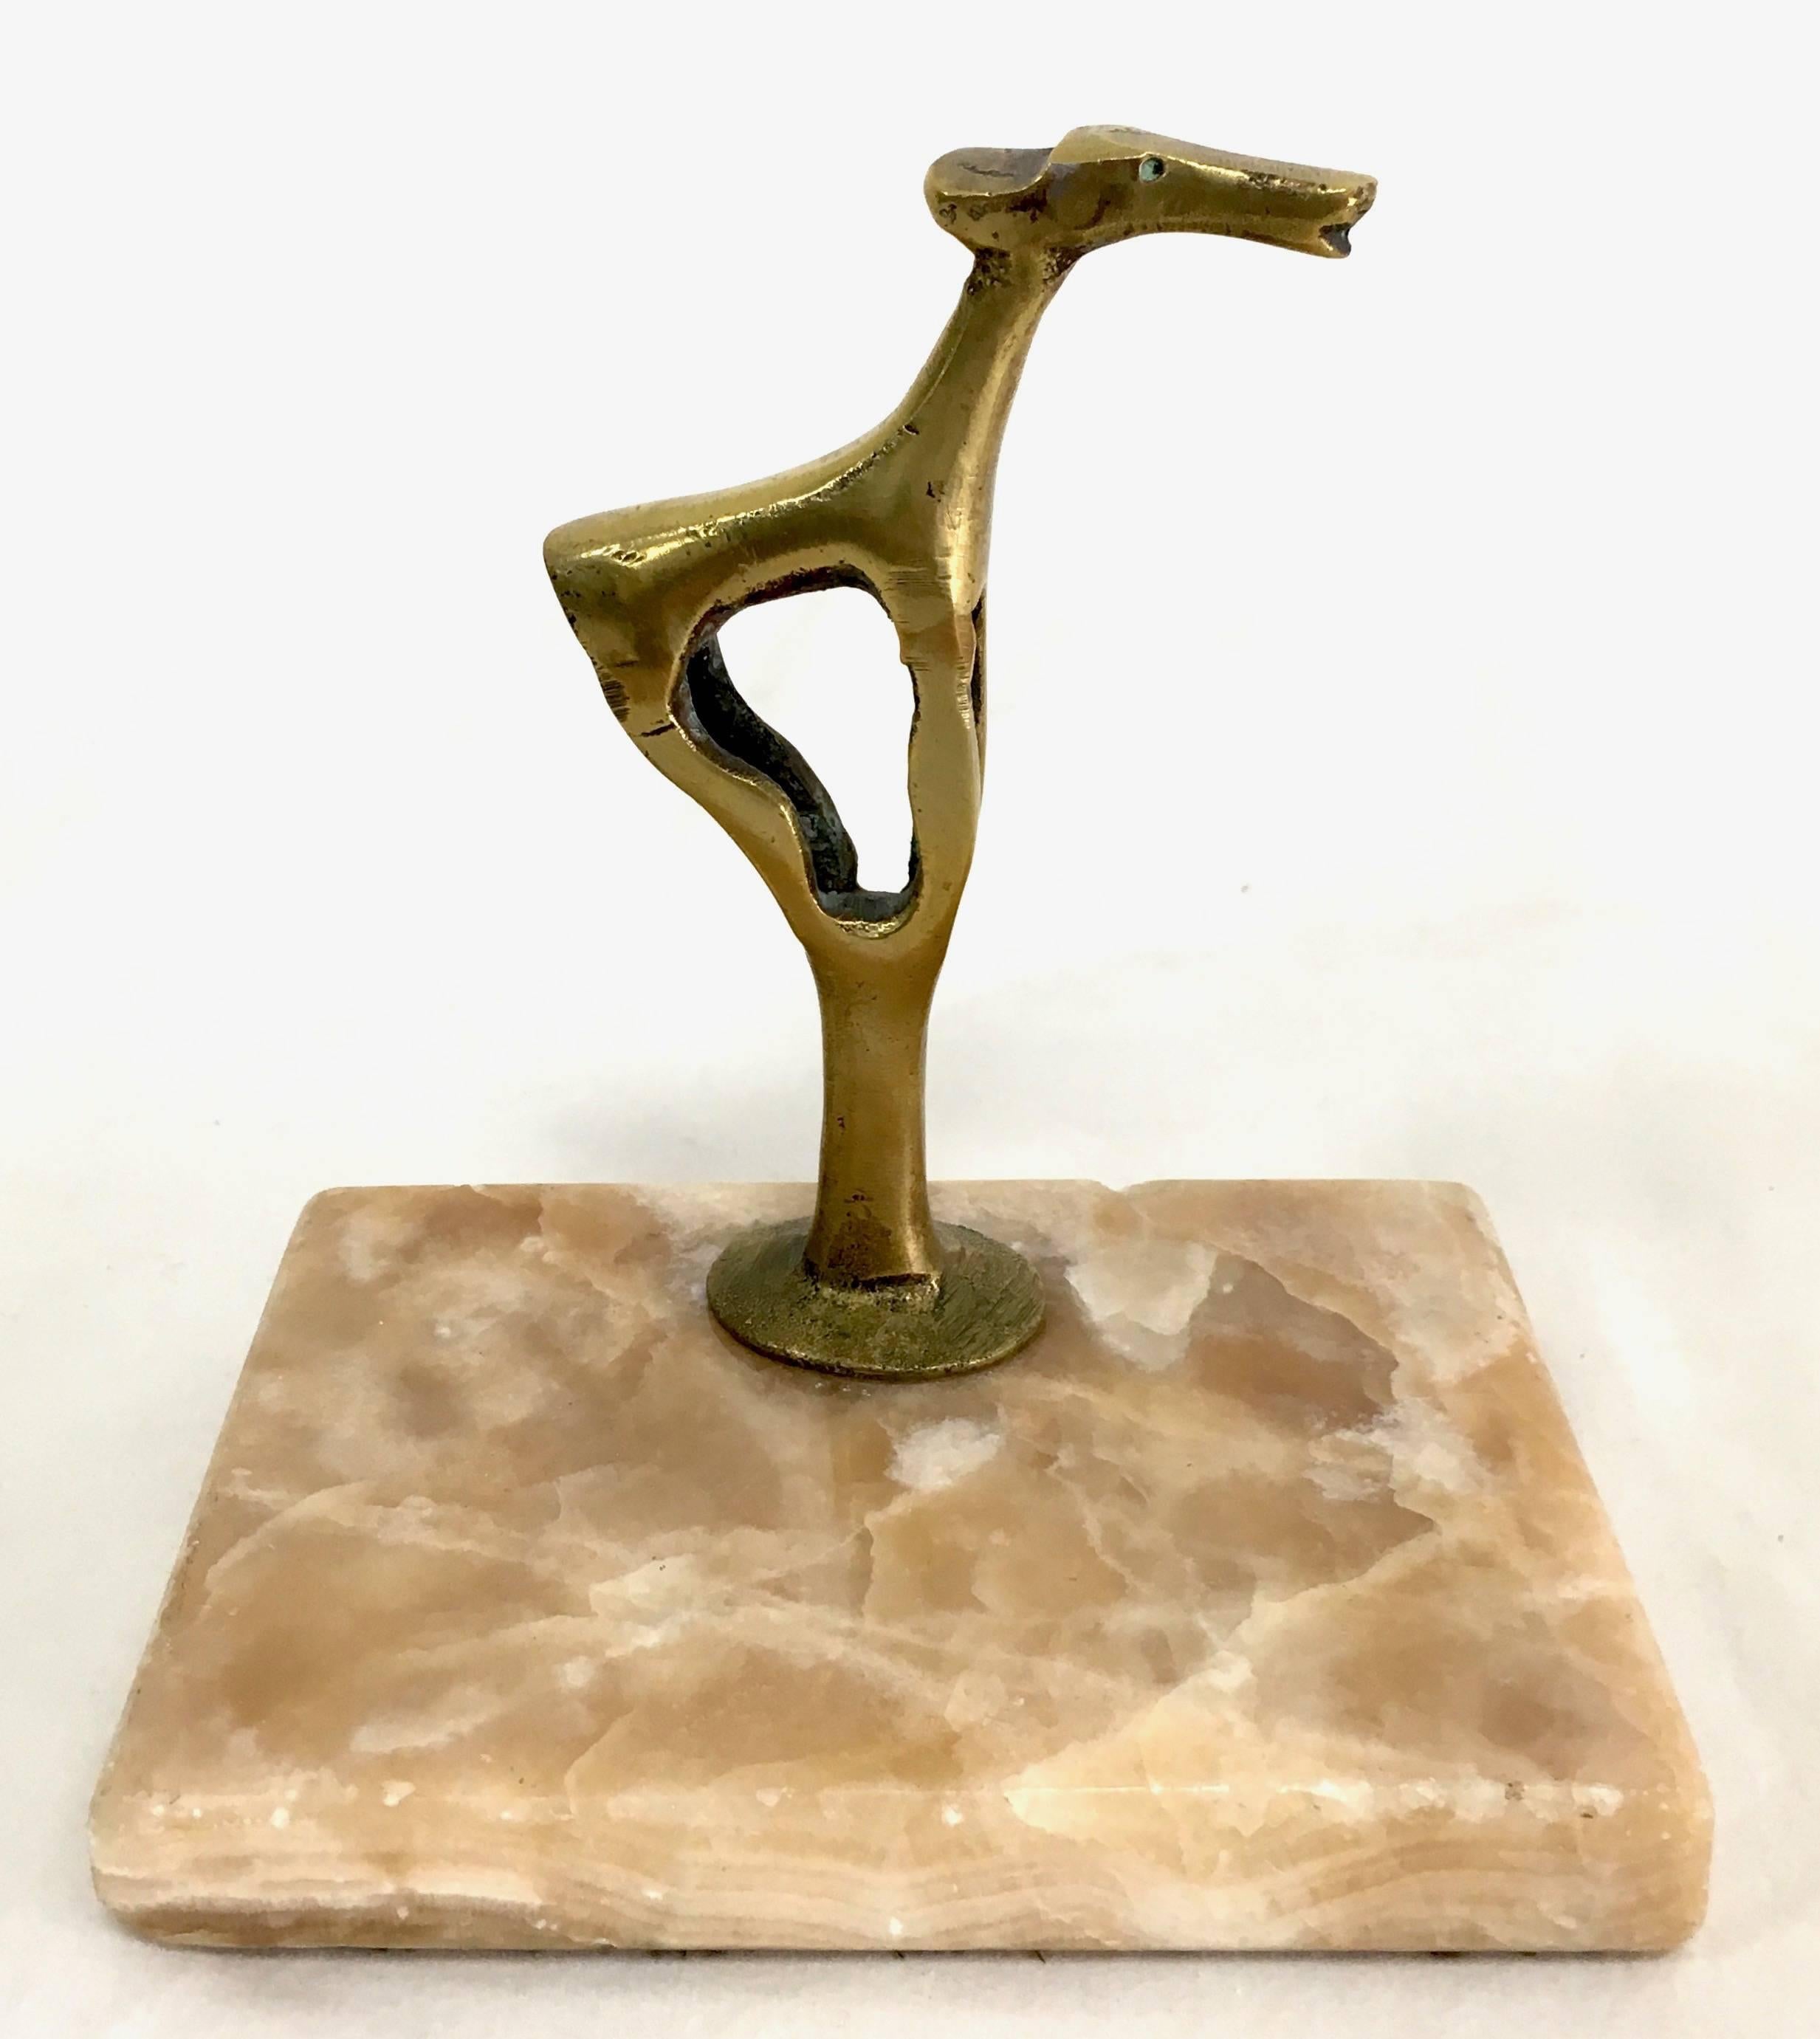 Unique marble and brass sculptural paper weight of a dog or animal.